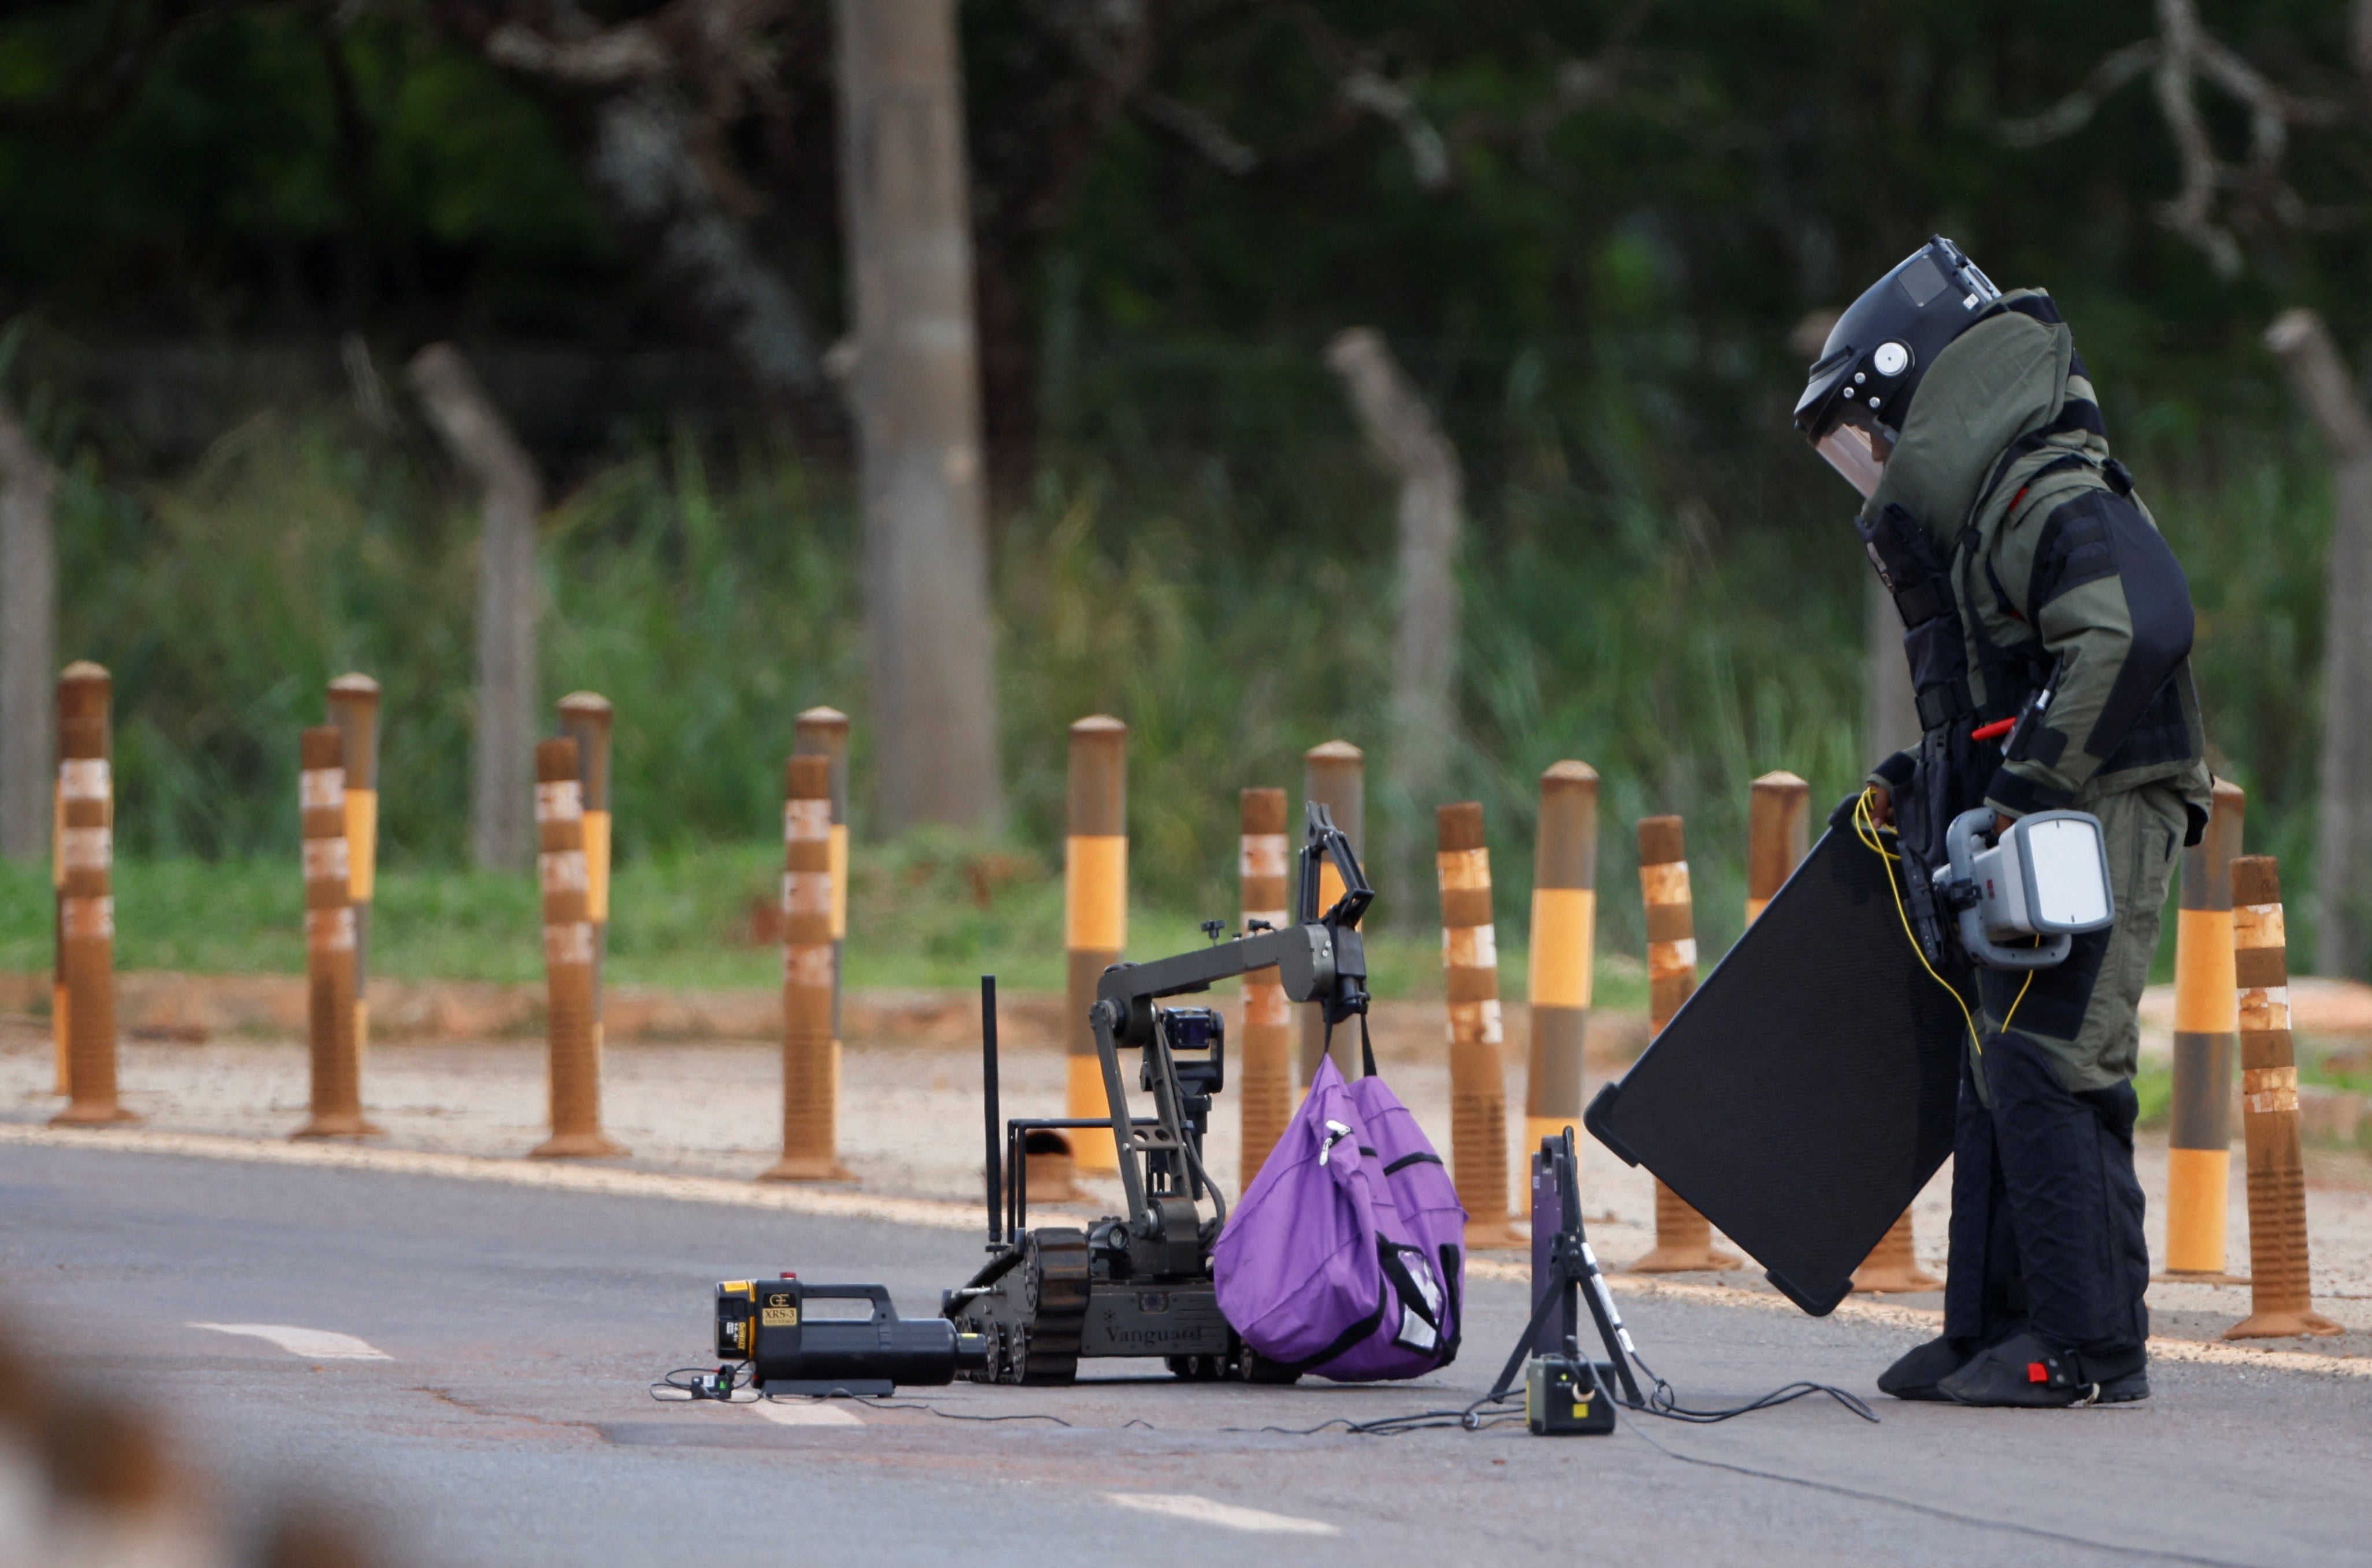 Anti-bomb police use a robot to deal with the explosive device in Brasilia on 24 December REUTERS/Adriano Machado